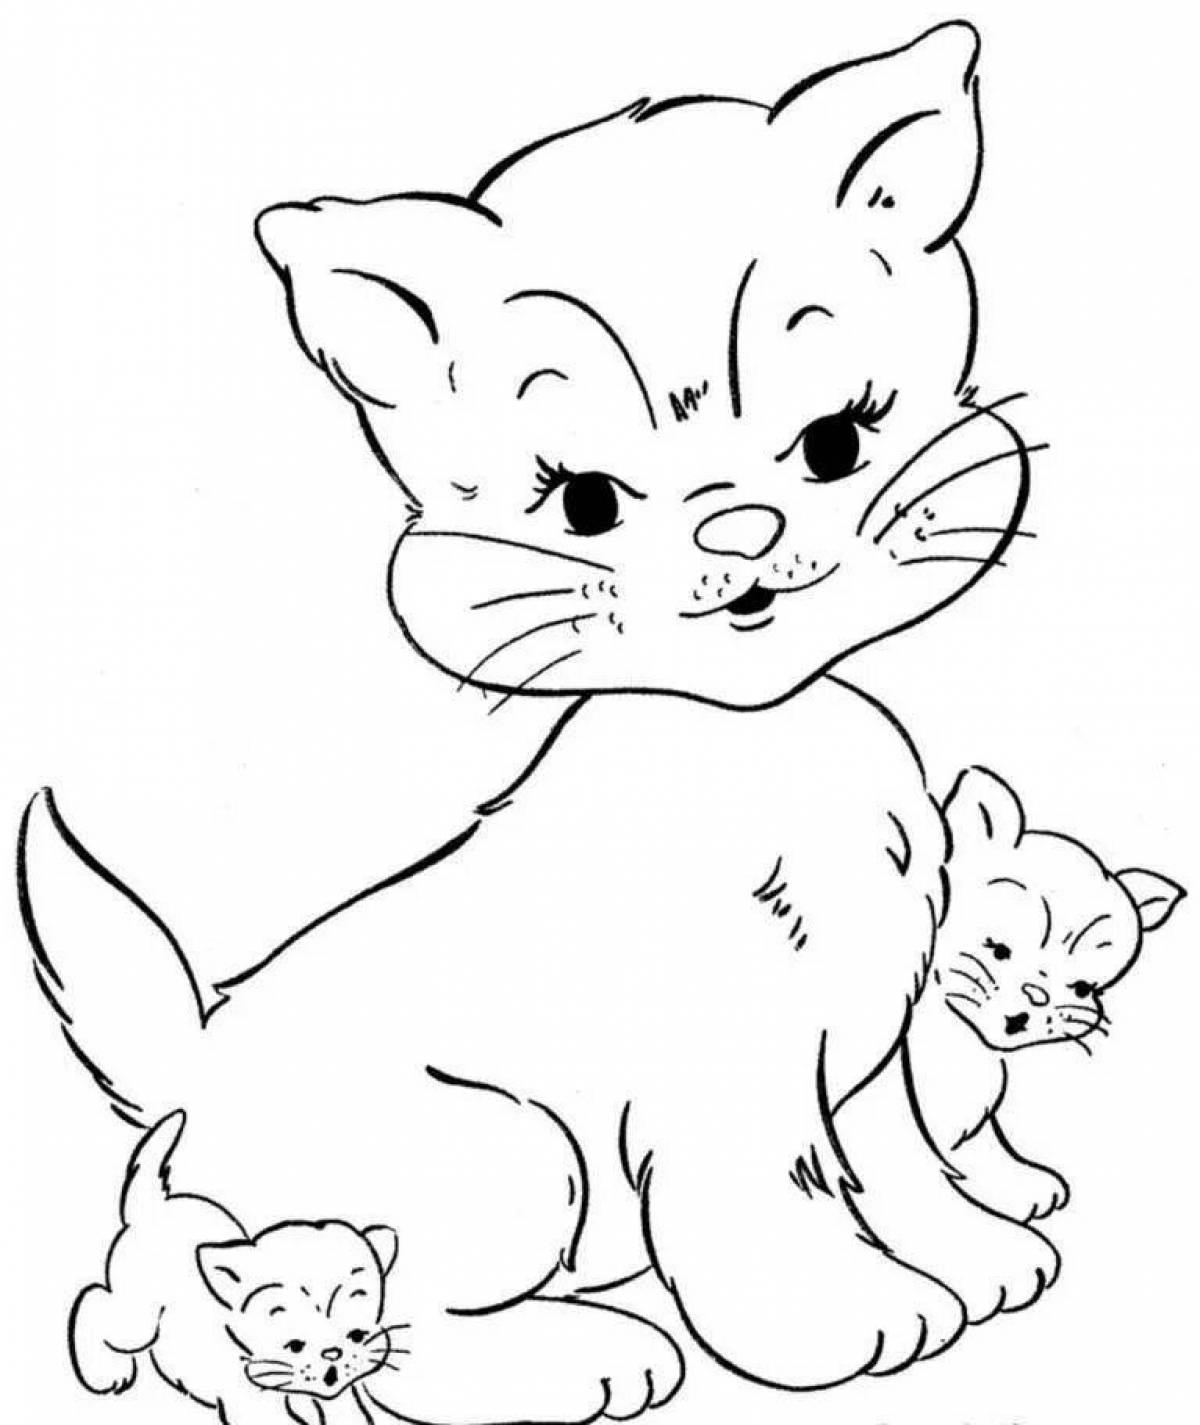 Animated cat coloring page for kids